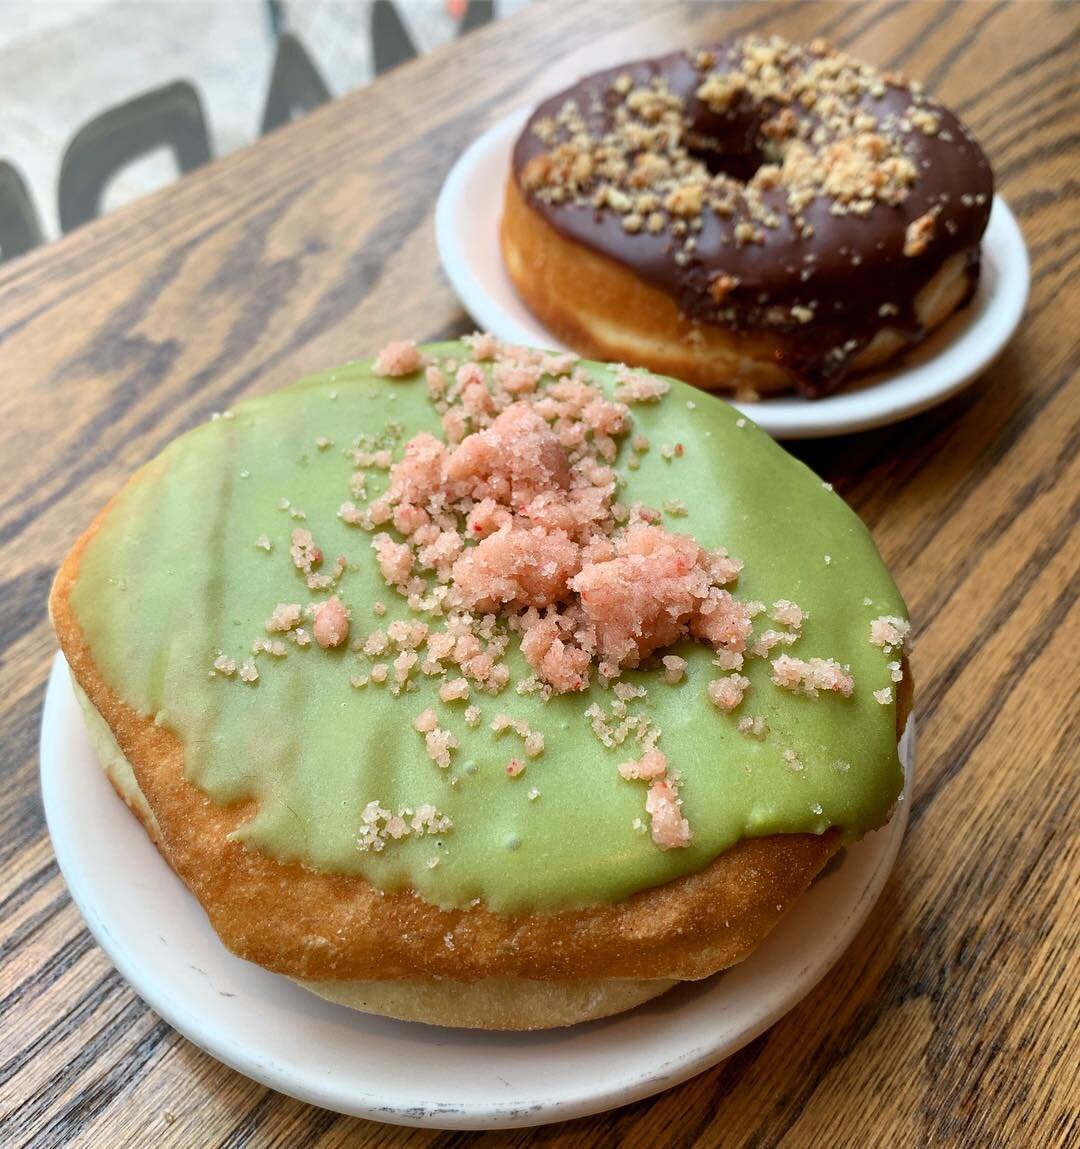 A donut with green matcha frosting and pink sugar sprinkled on top, and another donut in the background with chocolate frosting and chopped hazelnuts on top at Dottie's Donuts in Philadelphia